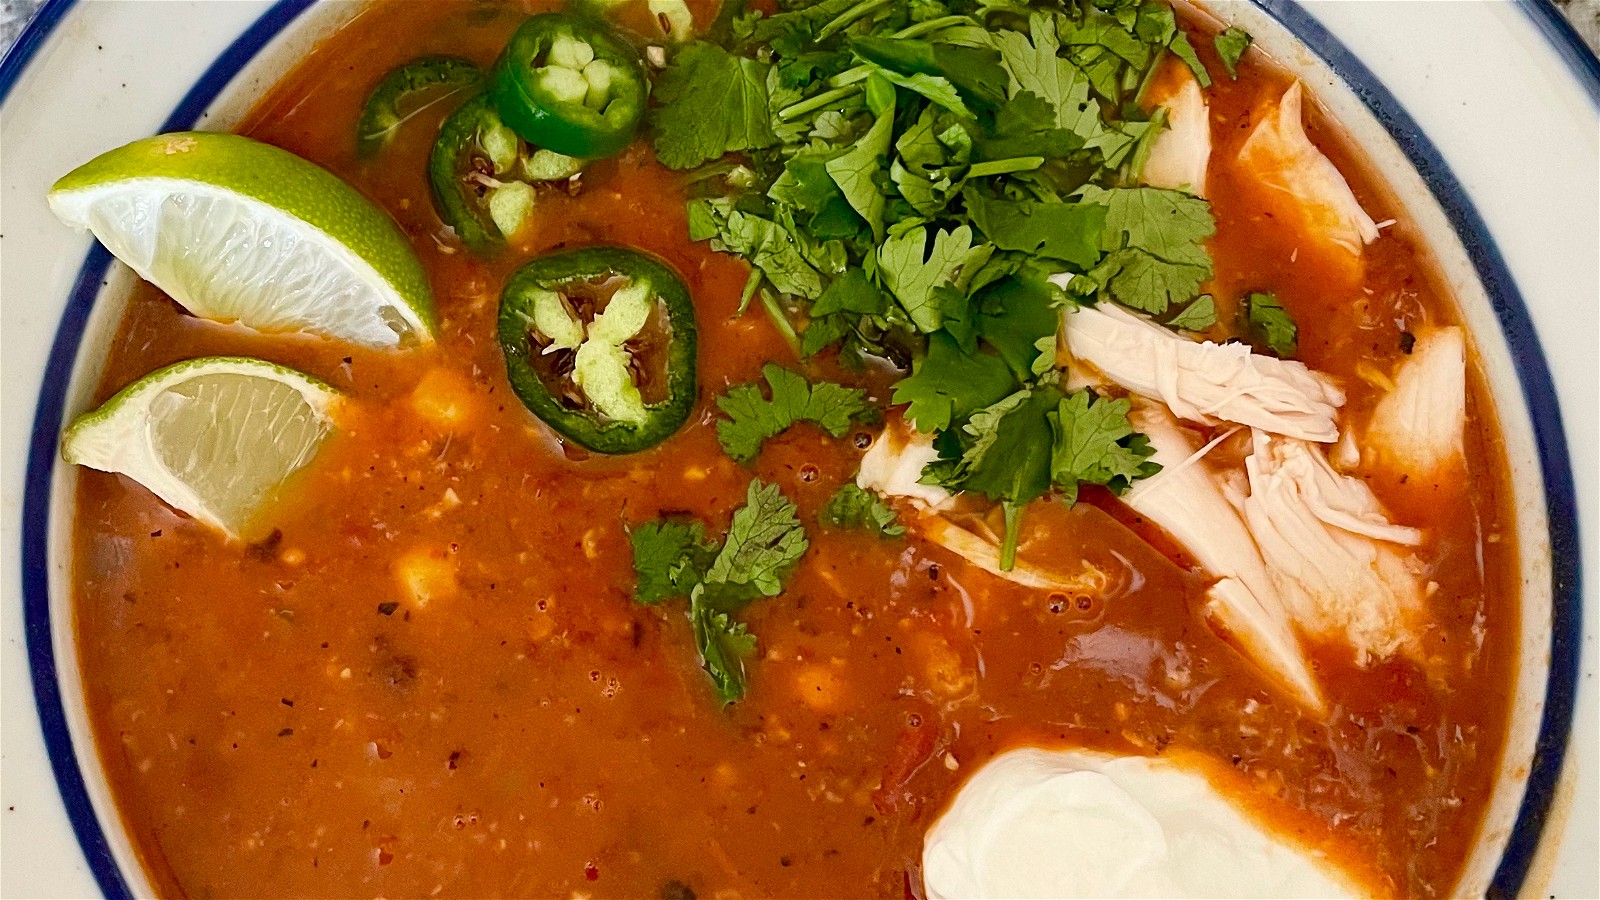 Spicy Chicken Tortilla Soup – Pat Cooks